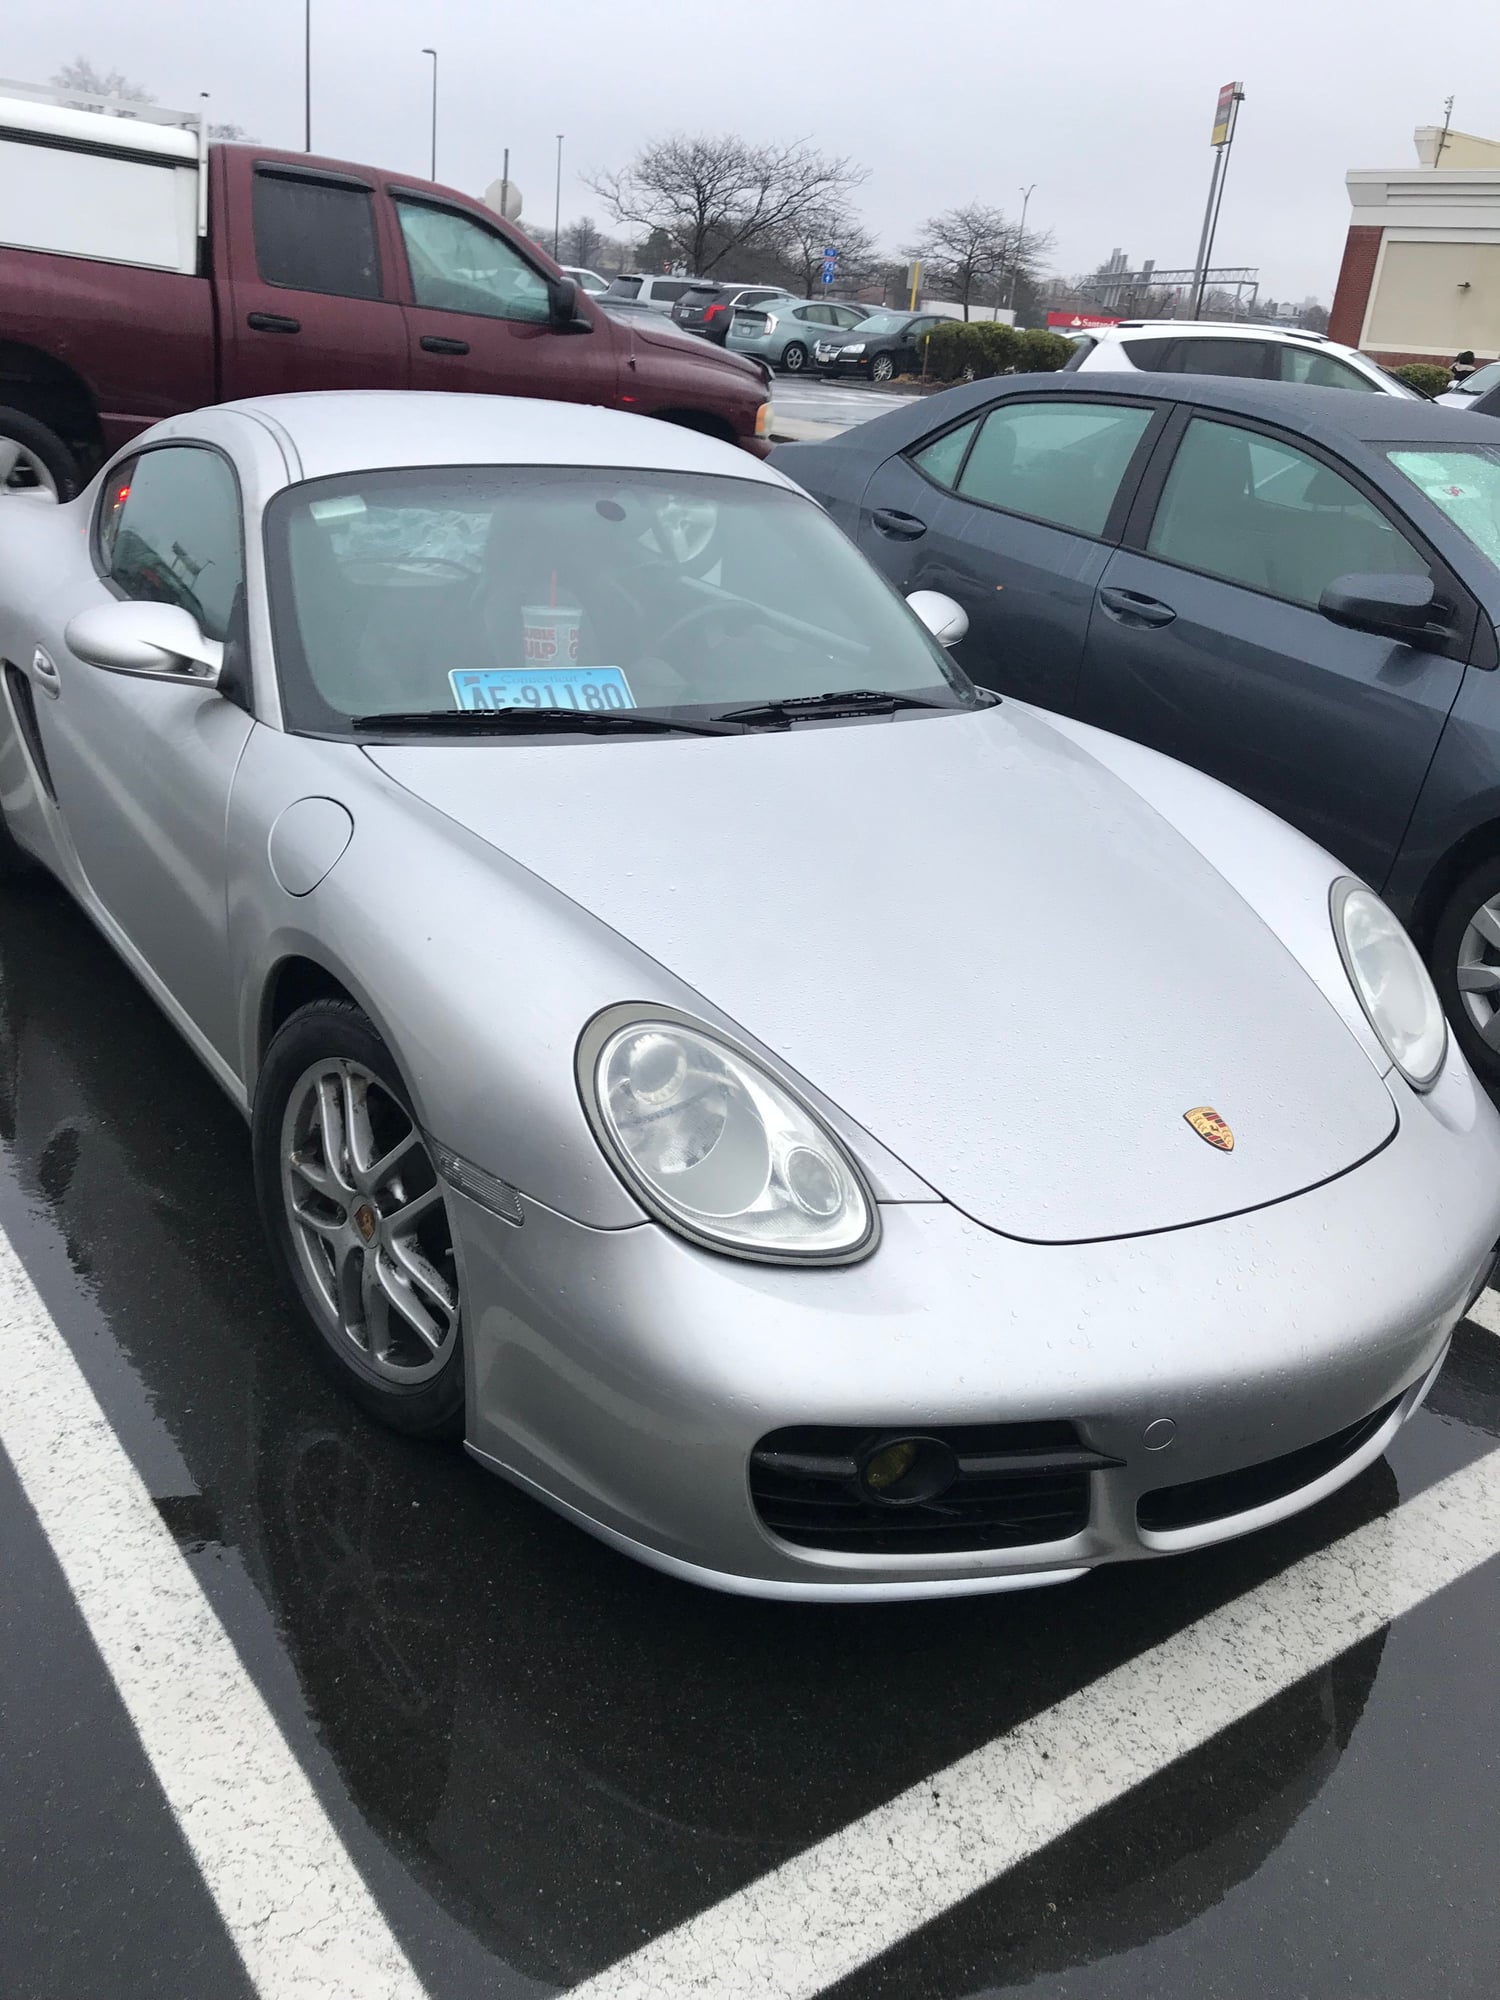 2007 Porsche Cayman - WTS: 2007 Porsche Cayman 2.7L 5spd Turn Key - Used - VIN WP0AA29807U762589 - 144,999 Miles - 6 cyl - 2WD - Manual - Coupe - Silver - Canton, CT 06019, United States